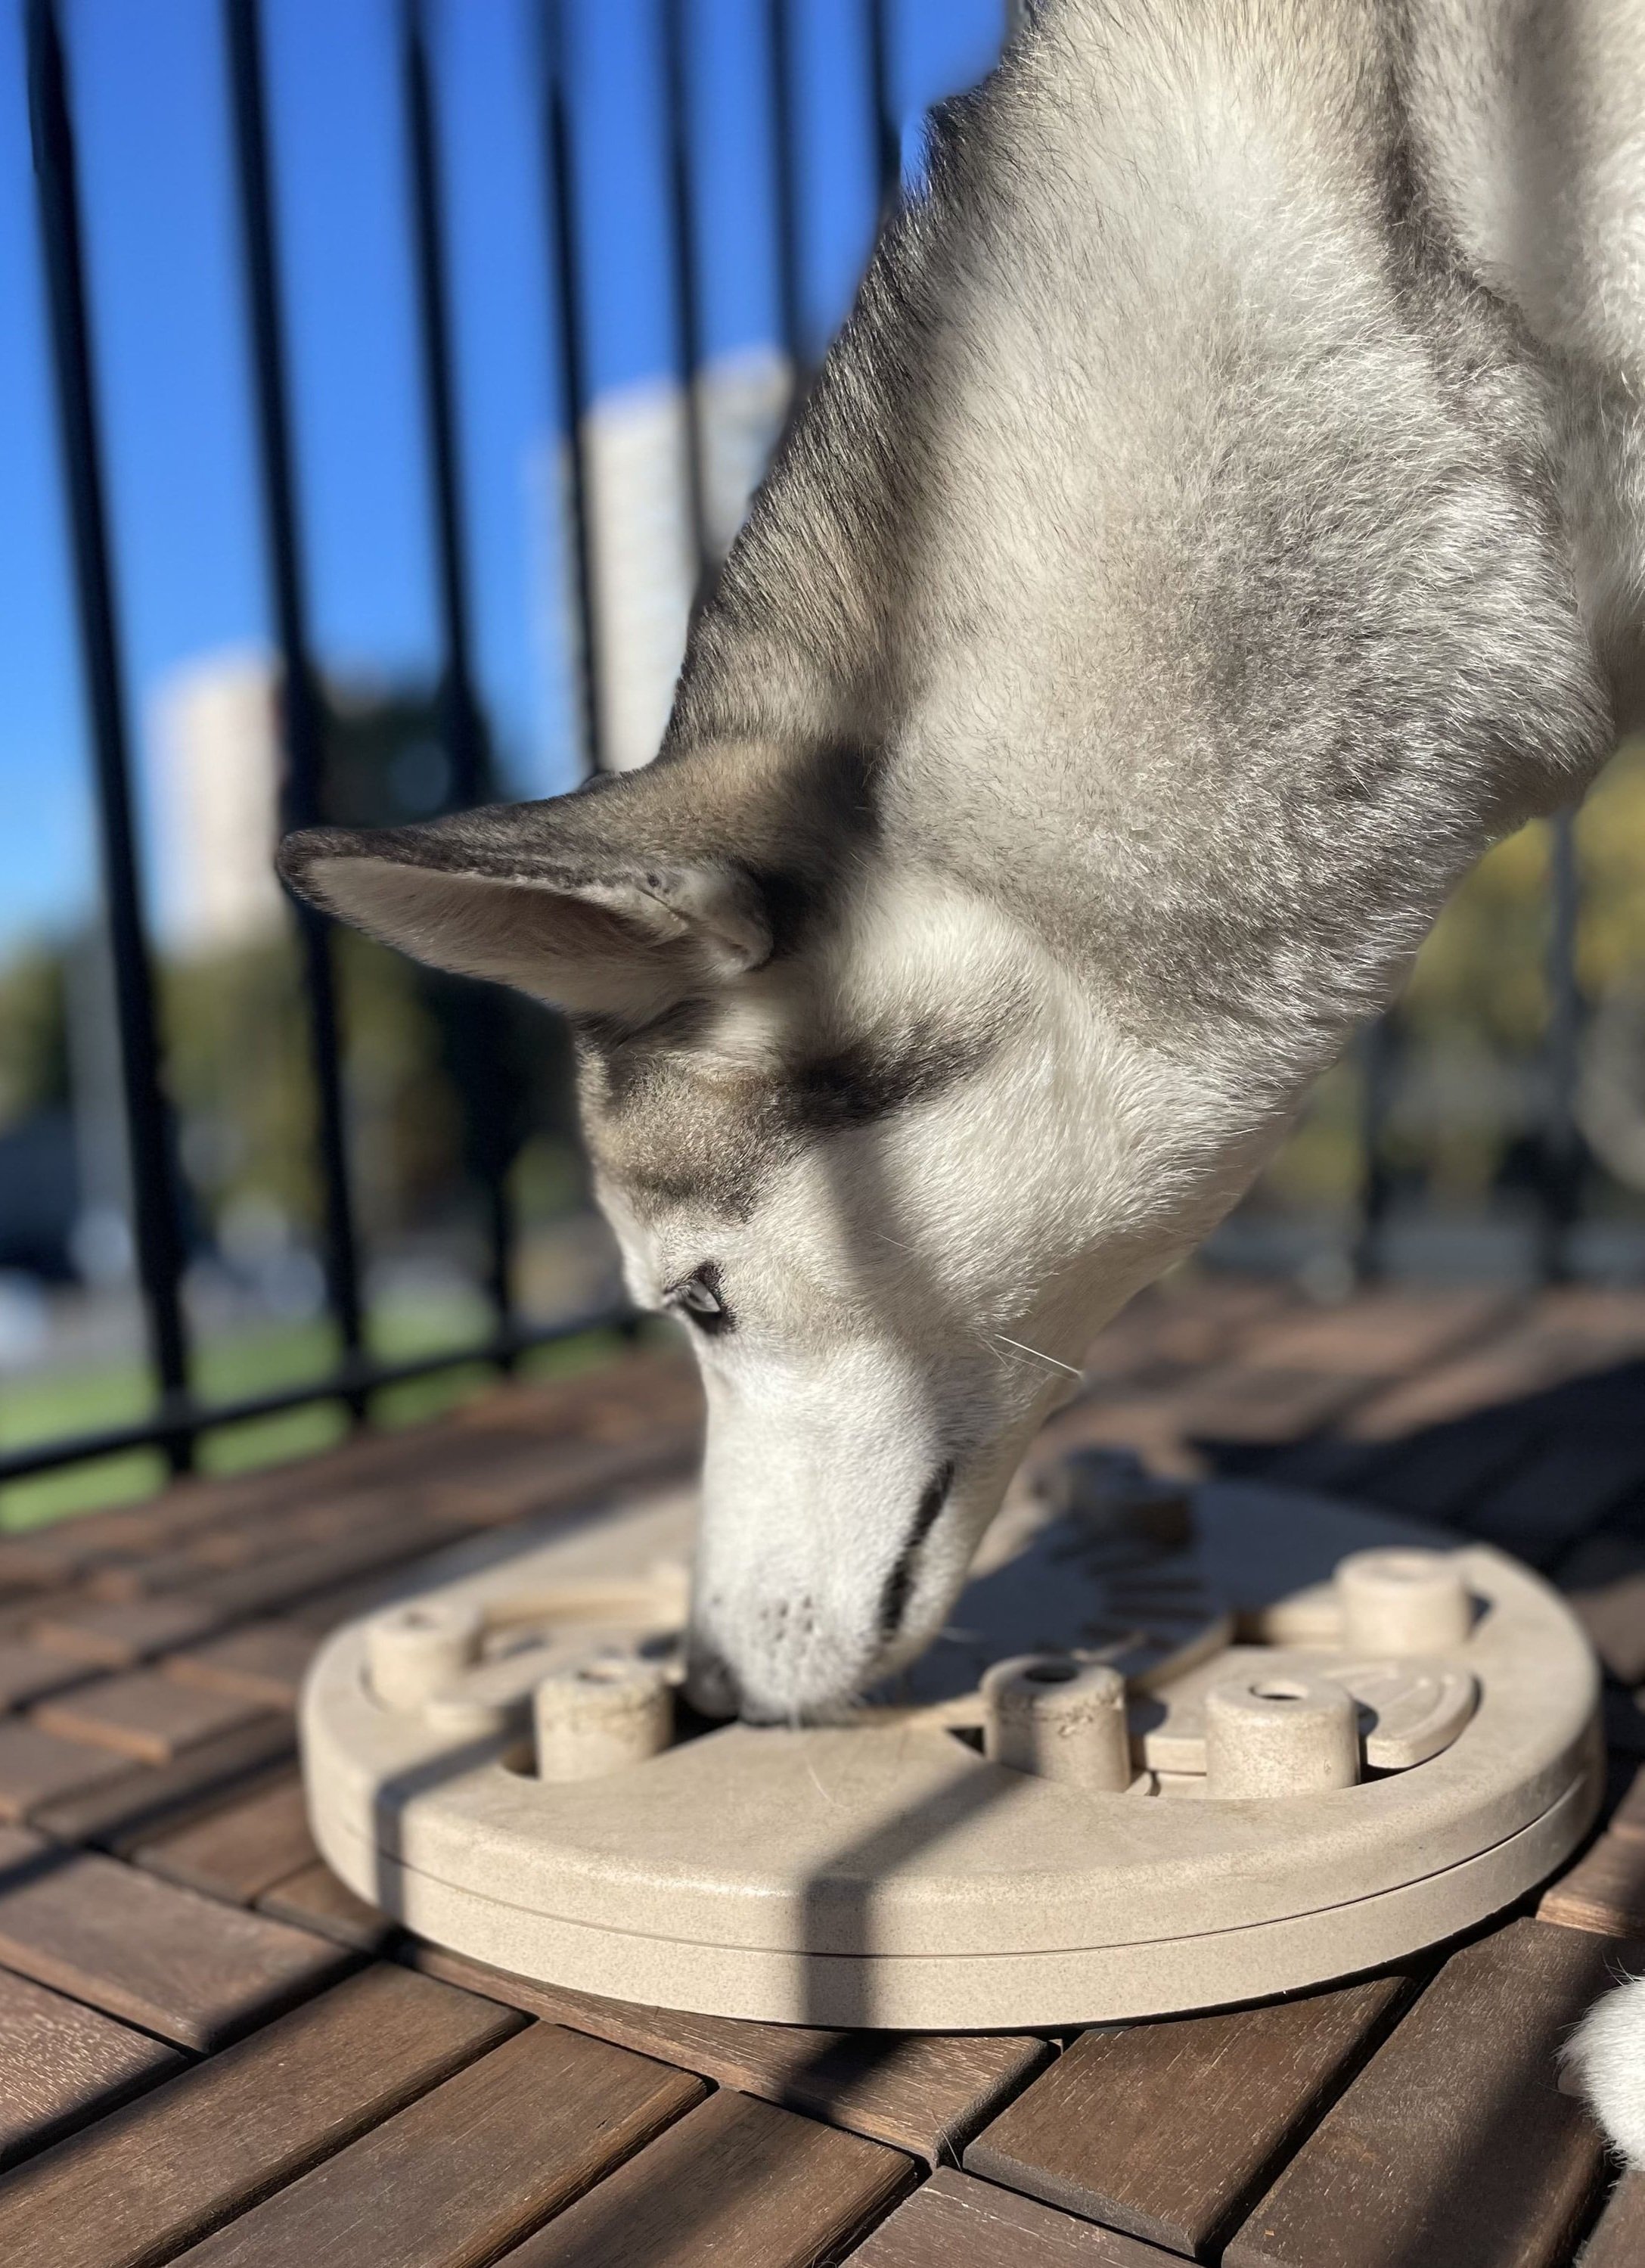 Review: Nina Ottosson Hide N'Slide Dog Enrichment Puzzle - Wear Wag Repeat